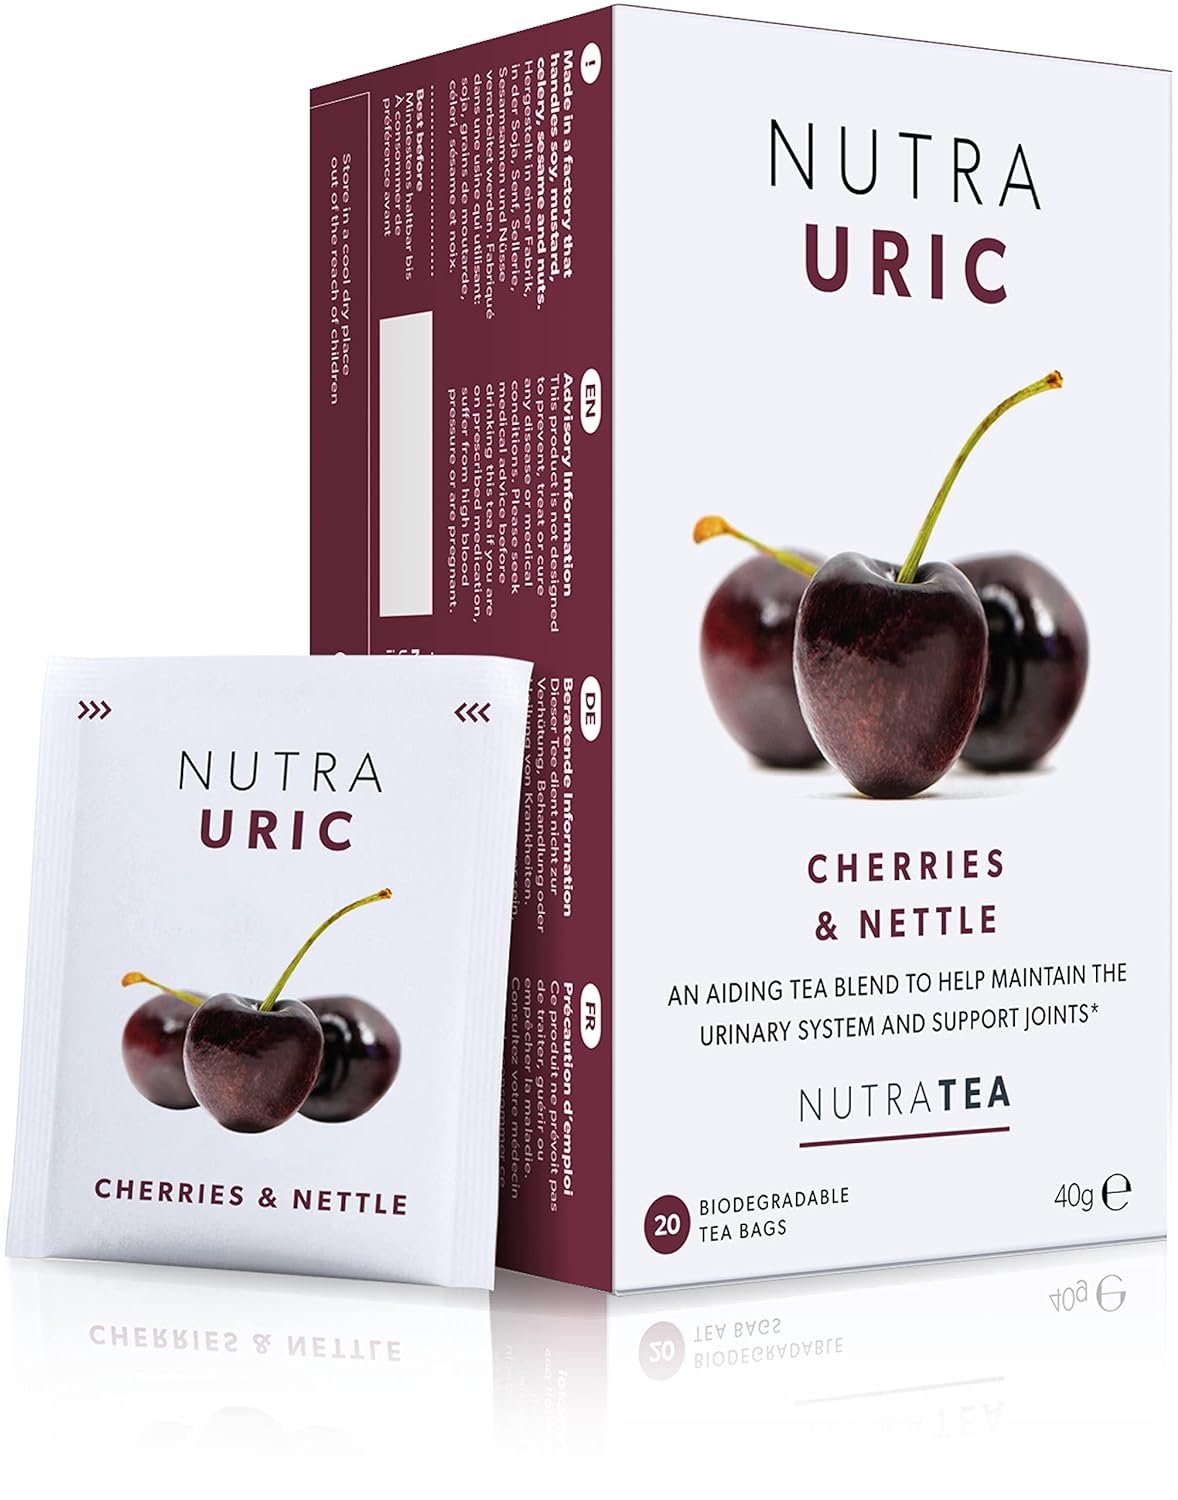 NUTRAURIC - Uric Acid Cleanse and Kidney Support – Kidney Cleanse Tea – Includes Cherry, Nettle  Turmeric - 20 Enveloped Tea Bags - by Nutra Tea - Herbal Tea